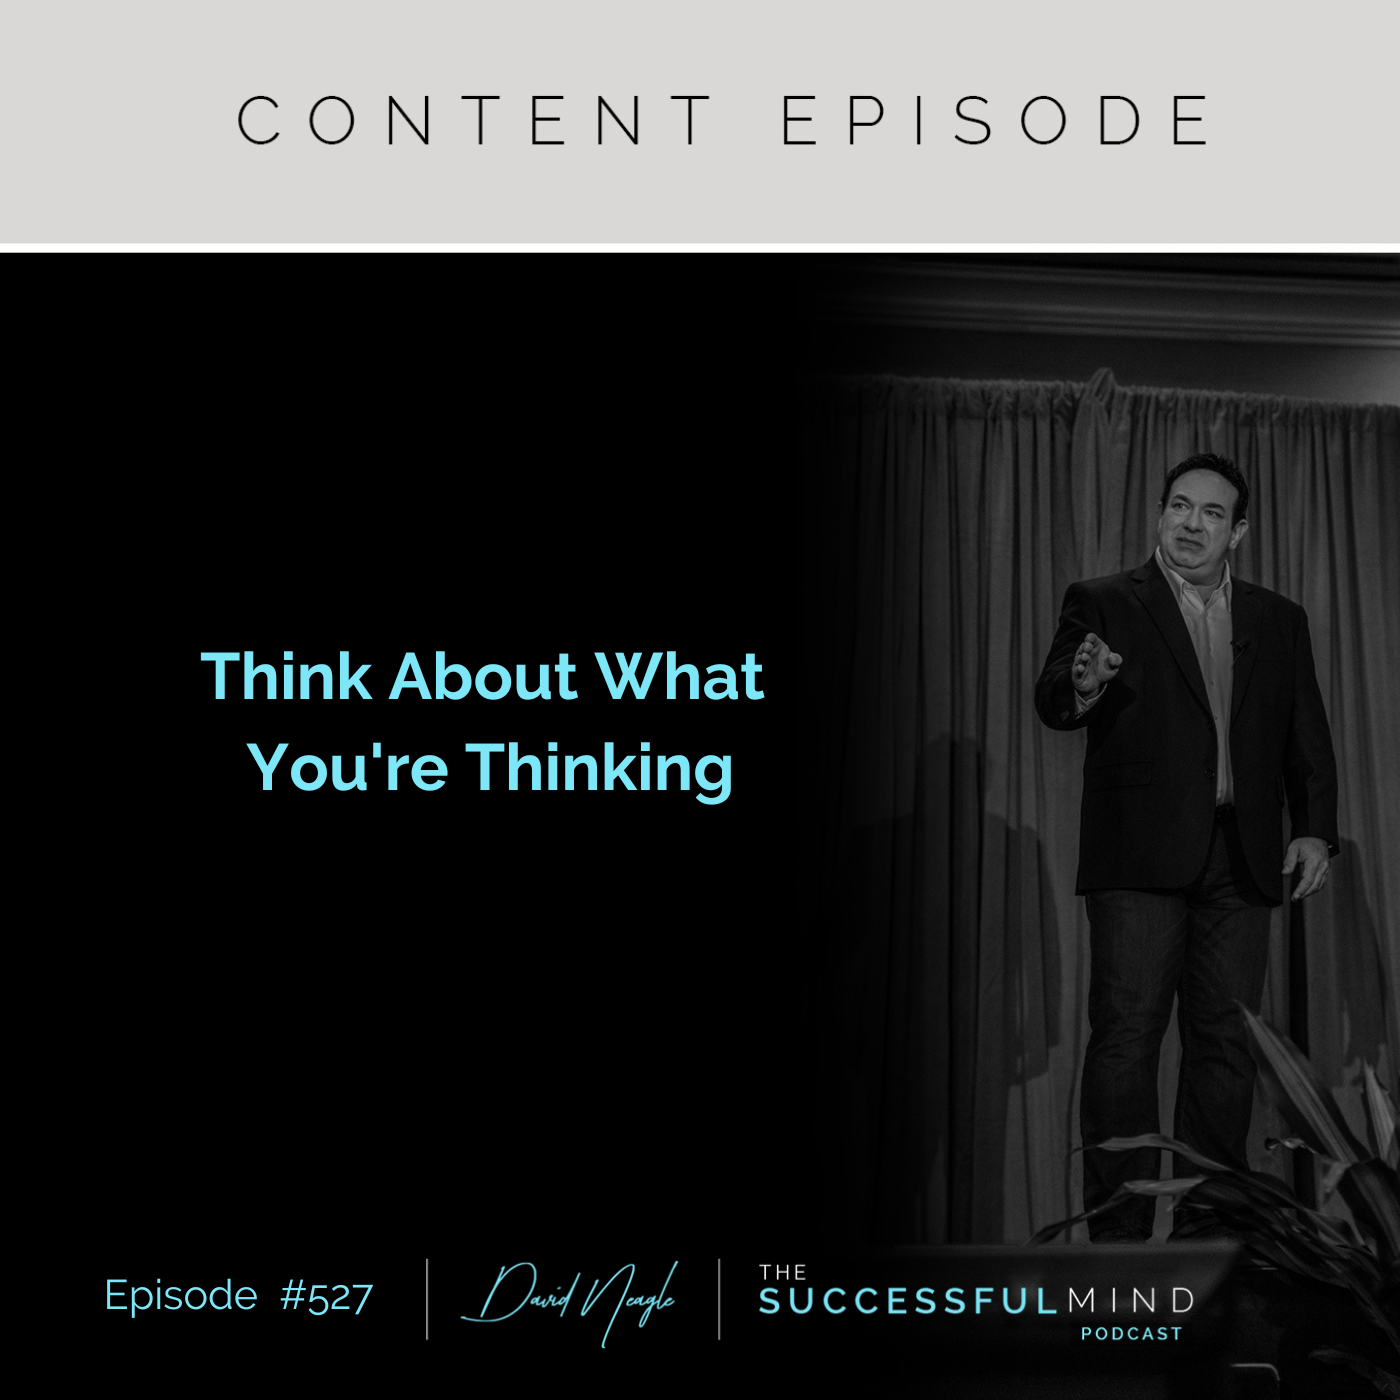 The Successful Mind Podcast – Episode 527 – Think About What You’re Thinking